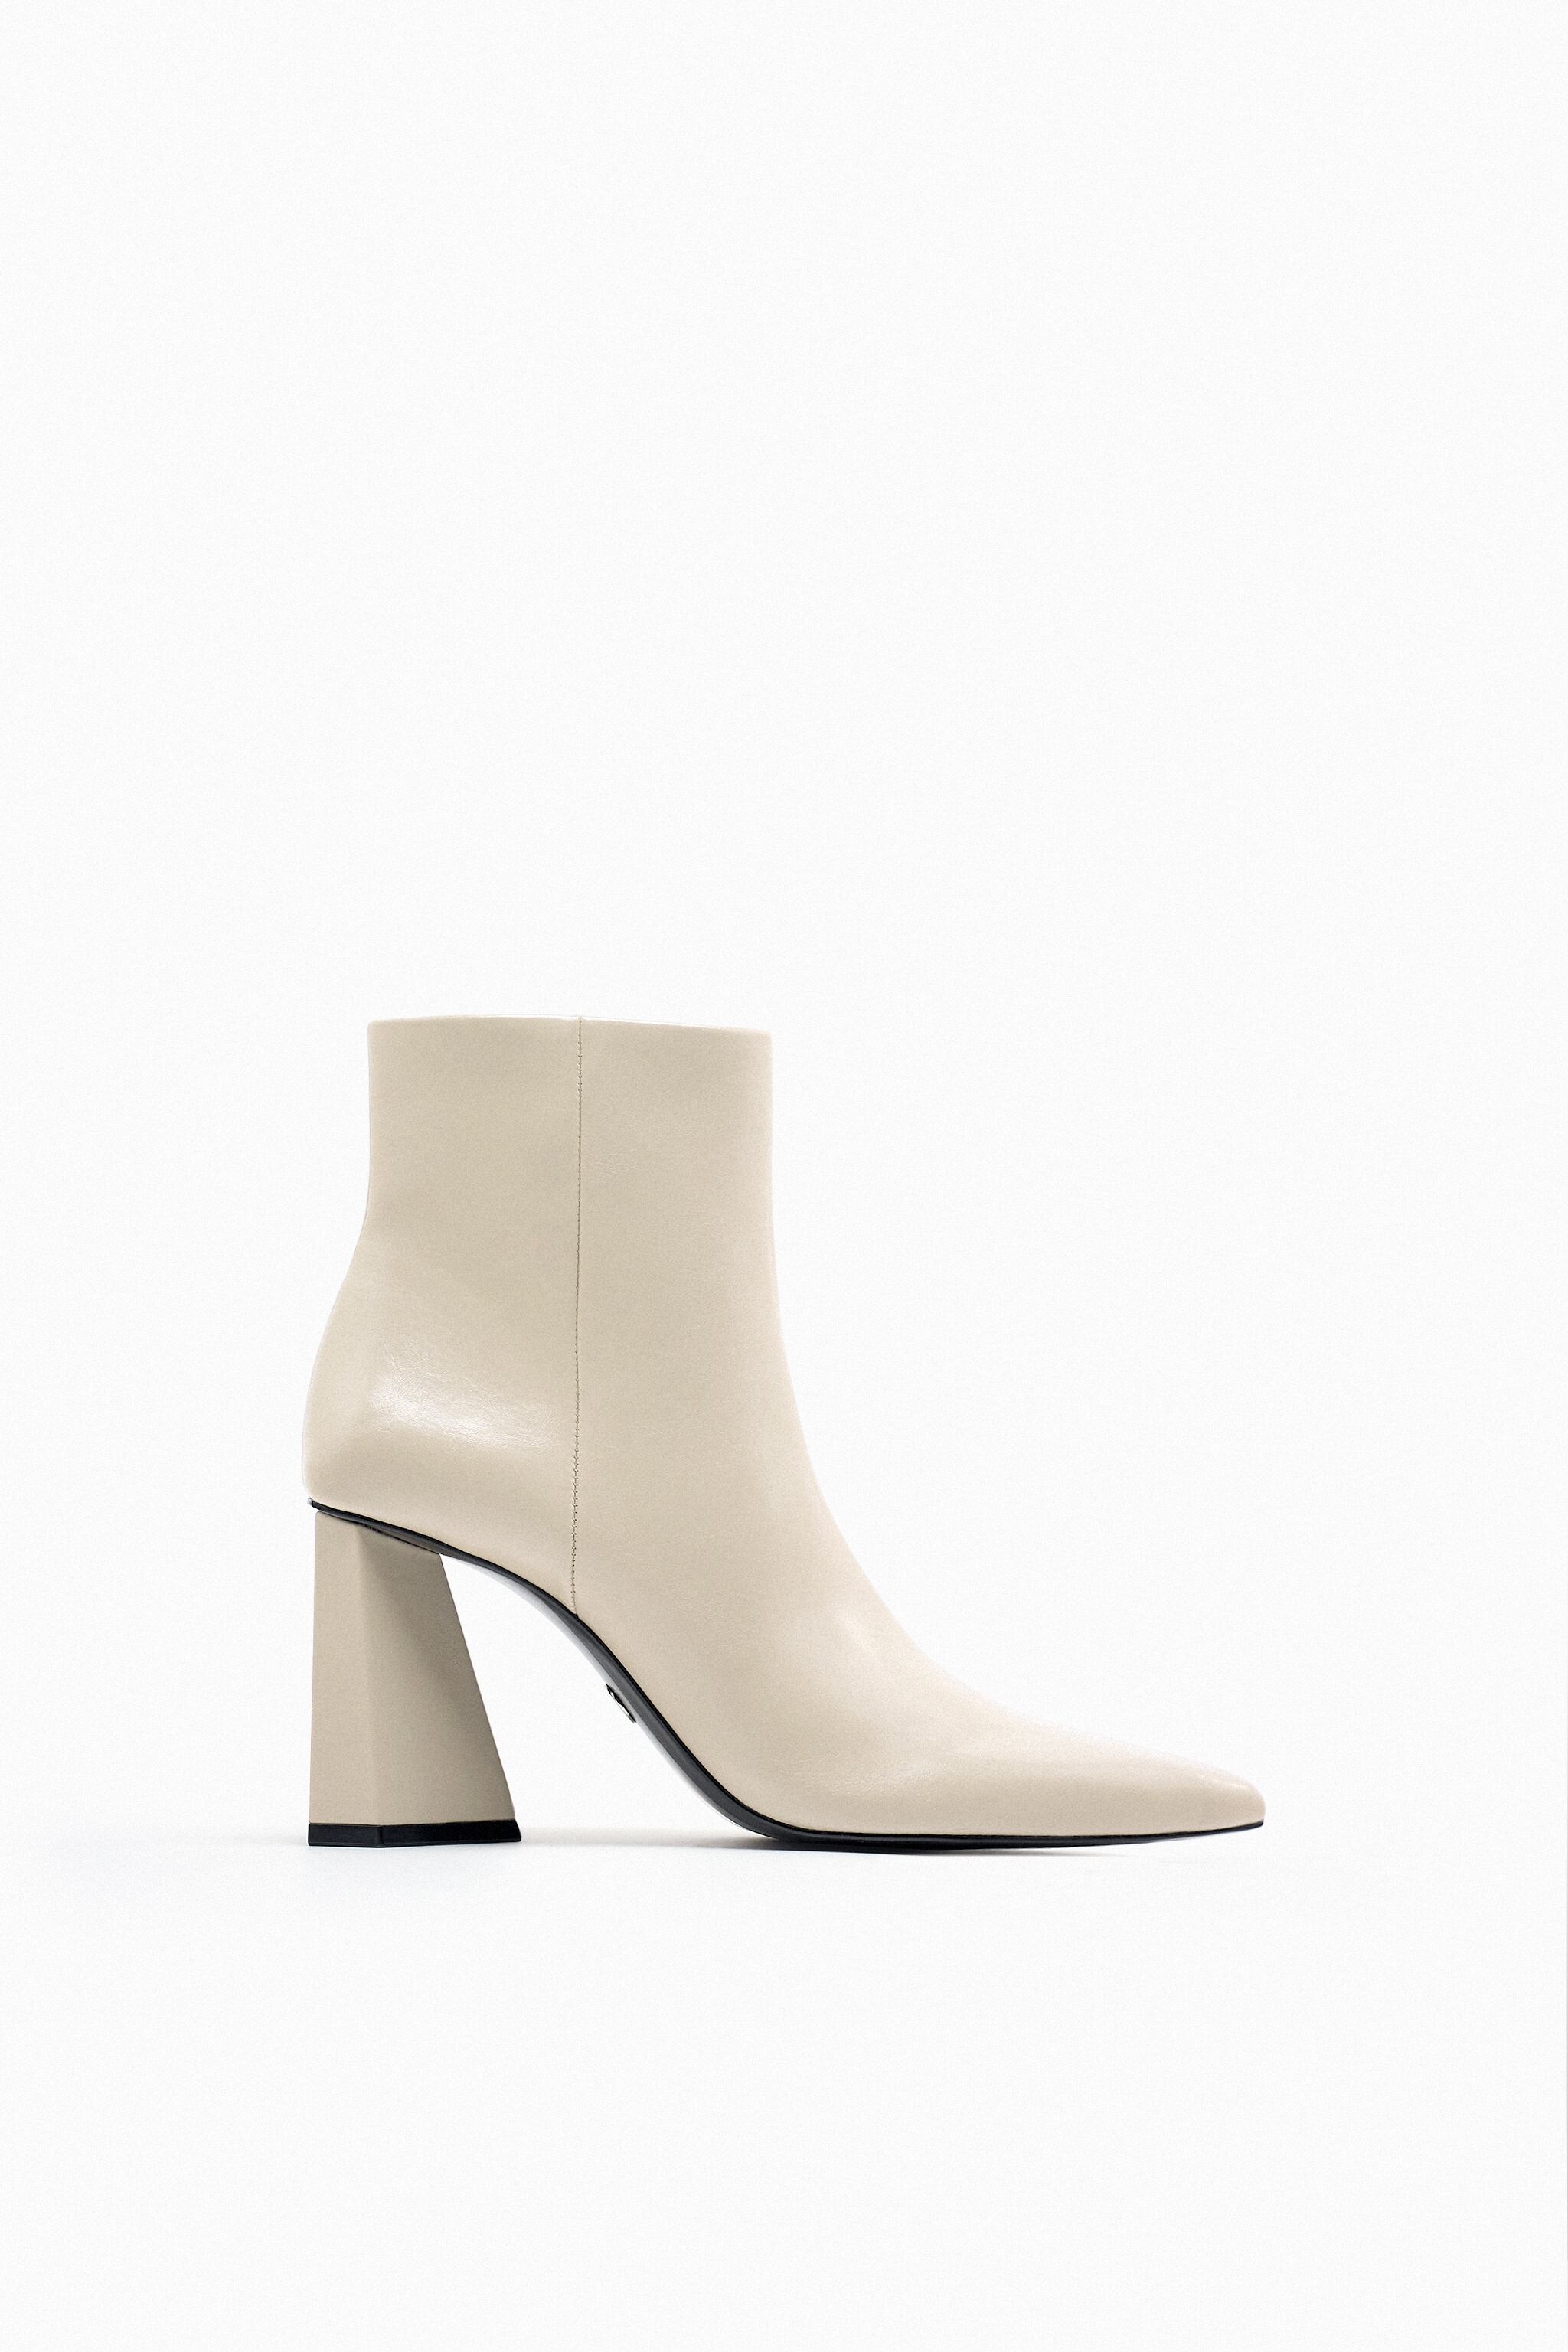 TRIANGULAR HEELED ANKLE BOOTS